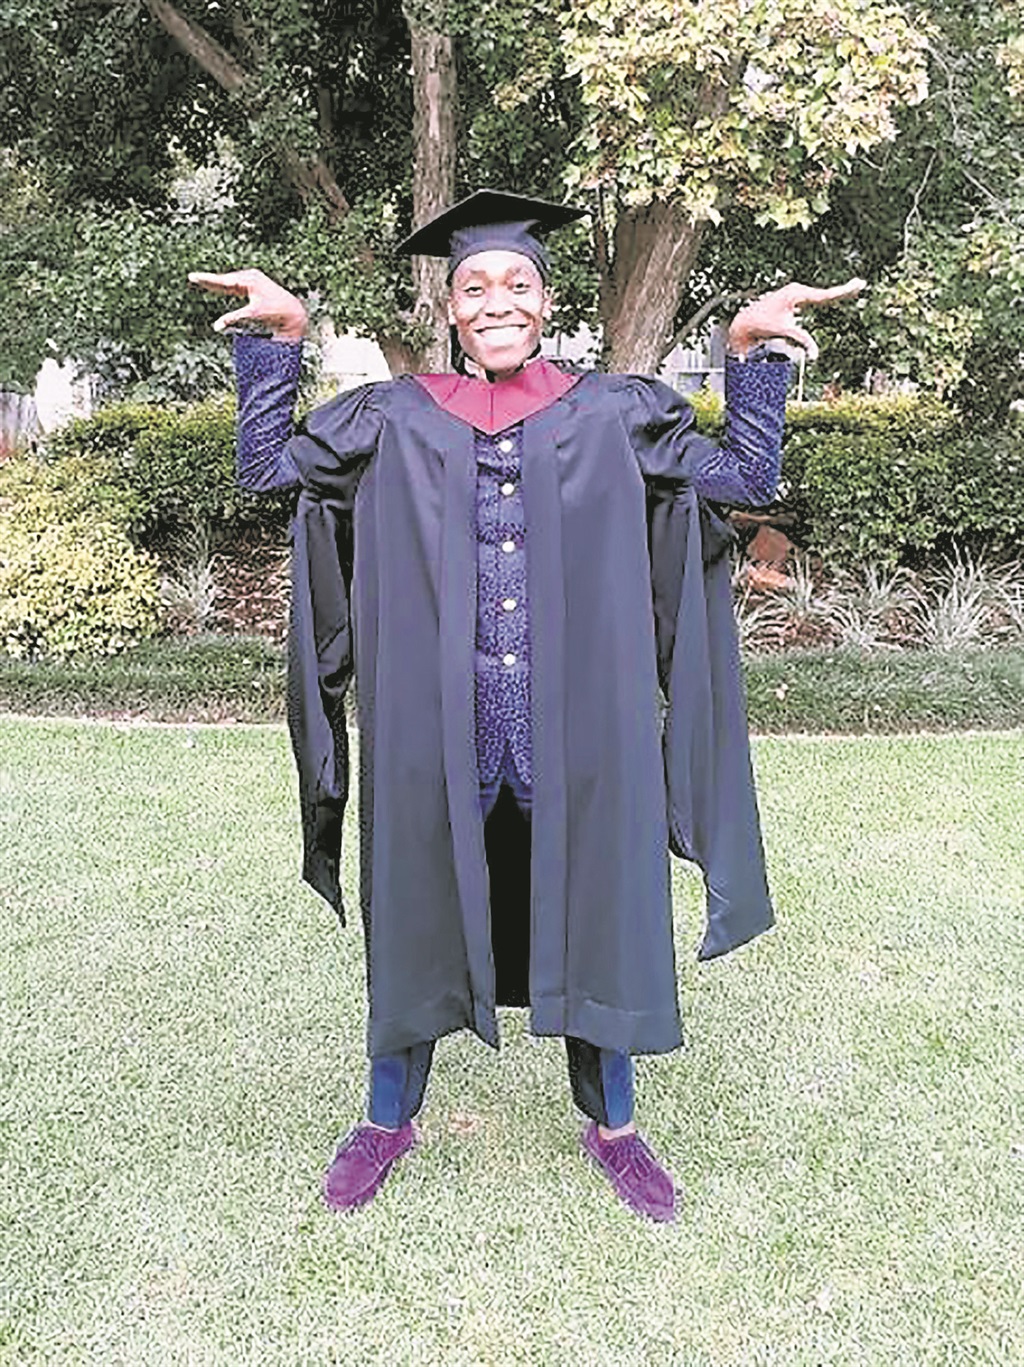 Caster Semenya posted a photo of herself in a graduation gown after completing her national diploma in Sports Science. 